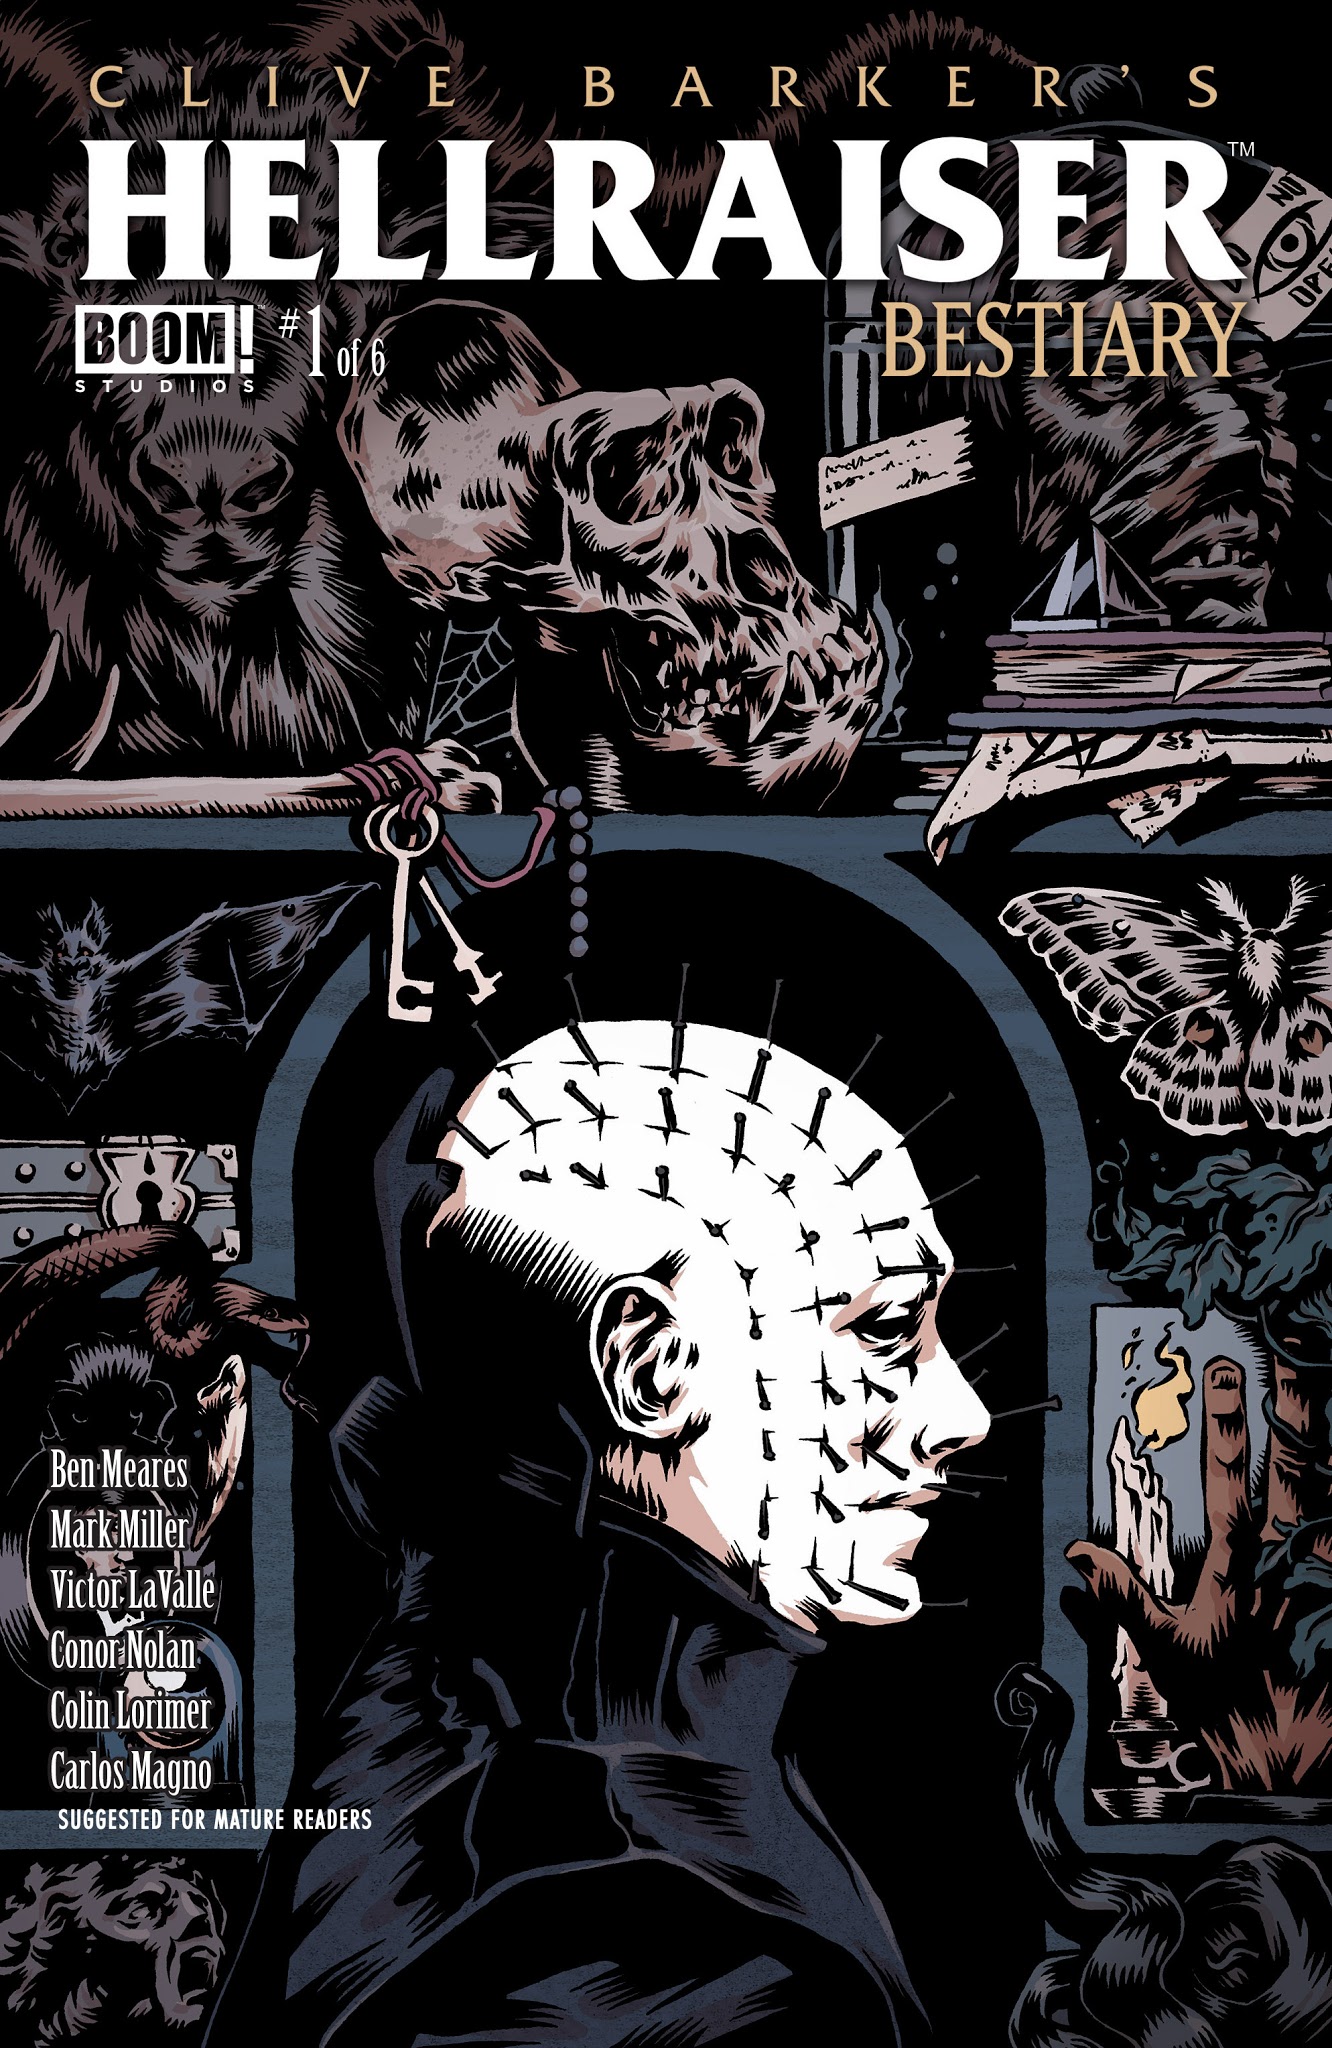 Read online Clive Barker's Hellraiser: Bestiary comic -  Issue #1 - 1